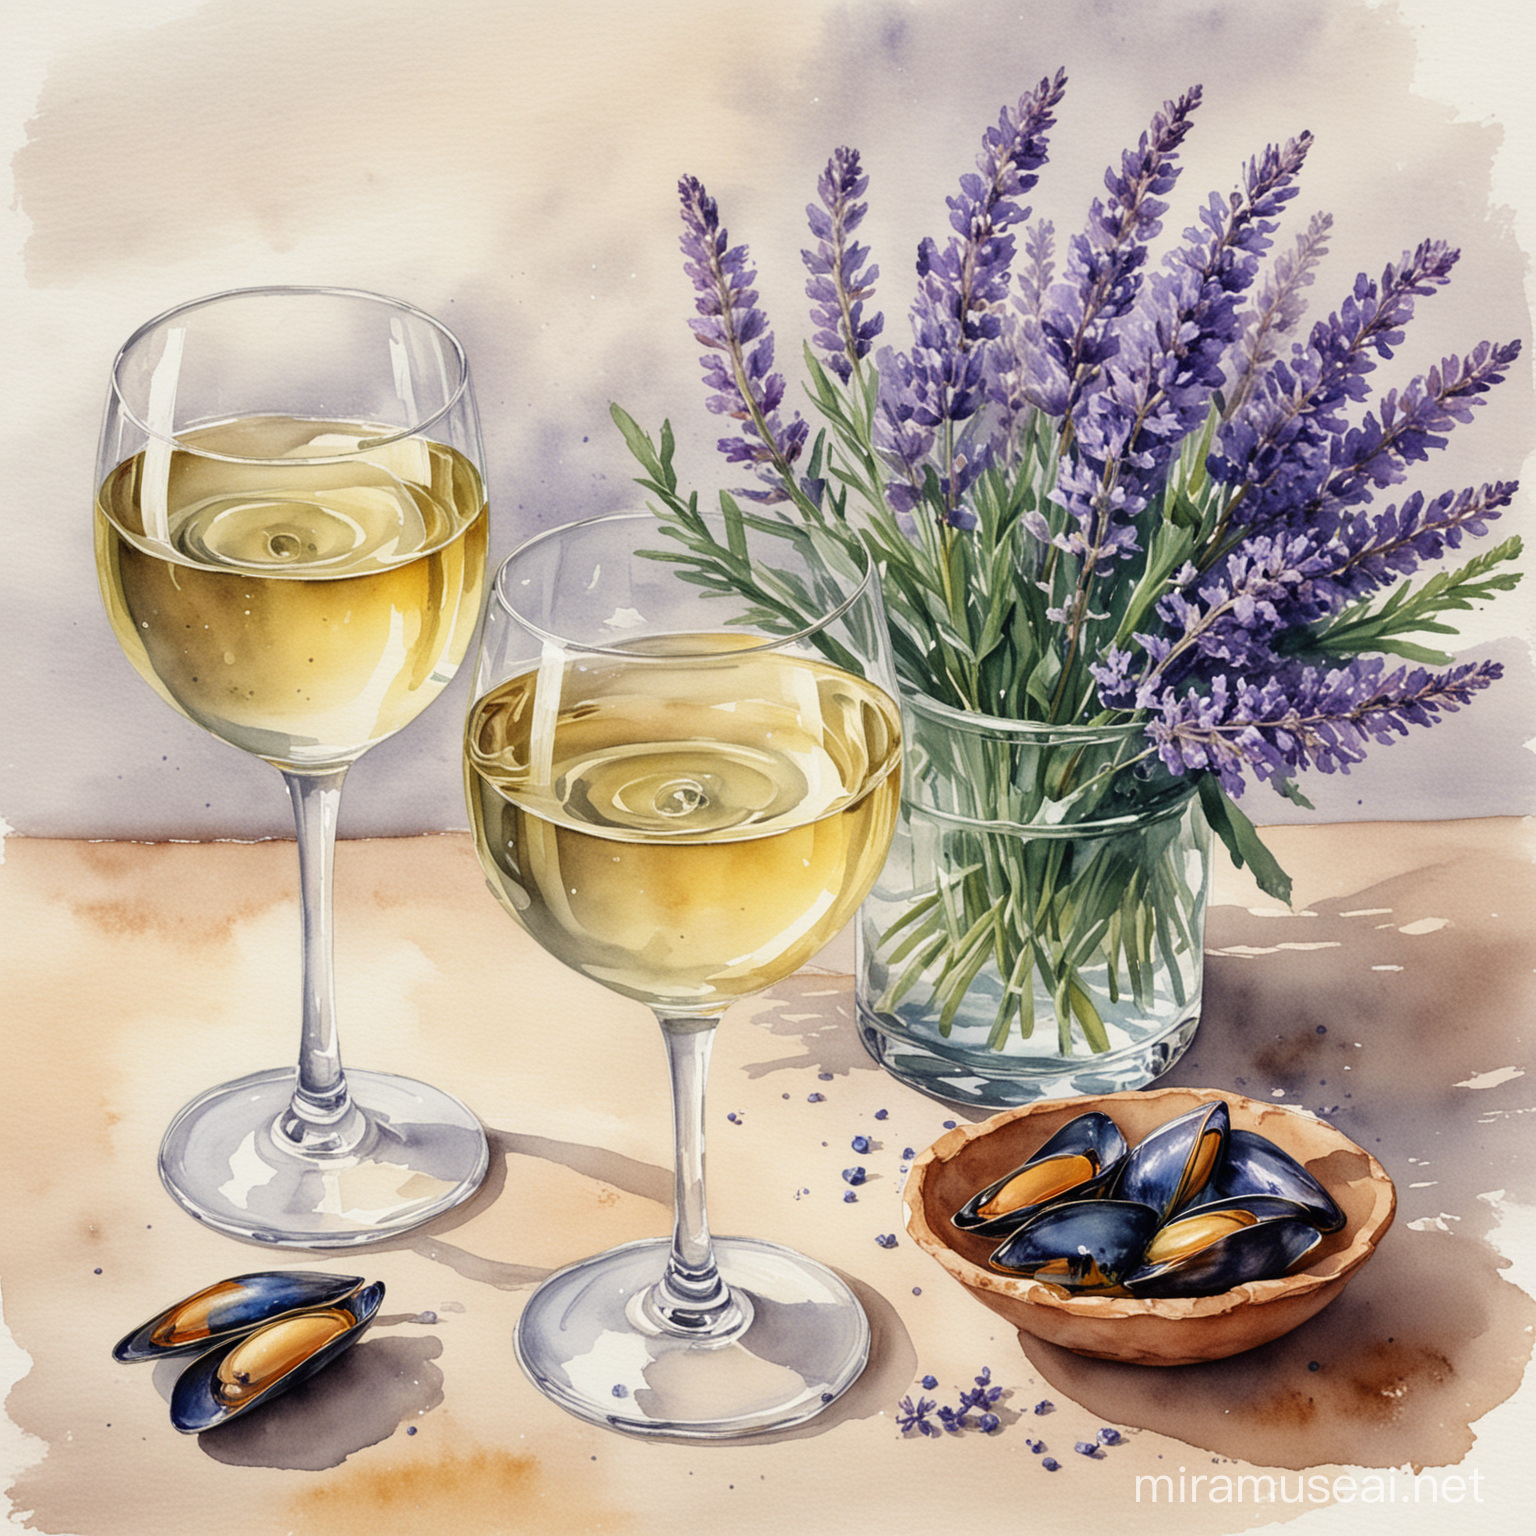 image drawn in watercolor: a glass of white wine, and 2 mussels near the glass , a bouquet of lavender nearby